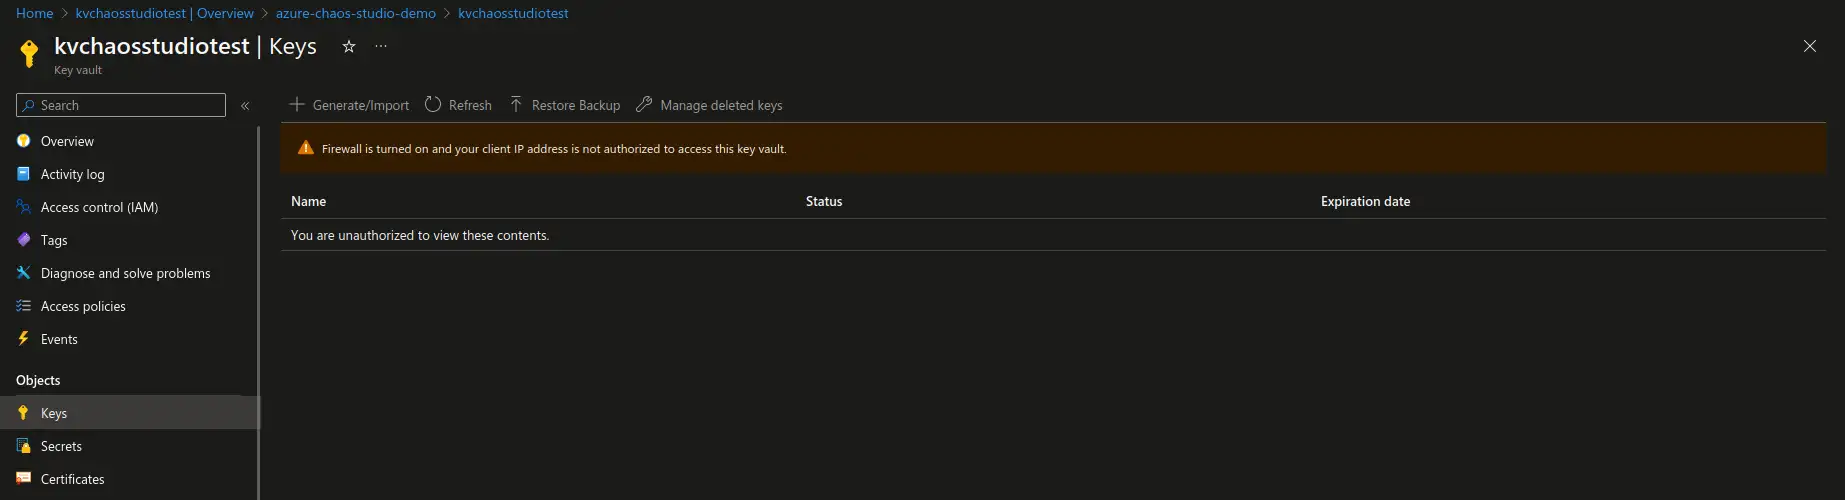 Screenshot of denied access to Key Vault objects while the experiment is running in Azure Chaos Studio in Azure portal